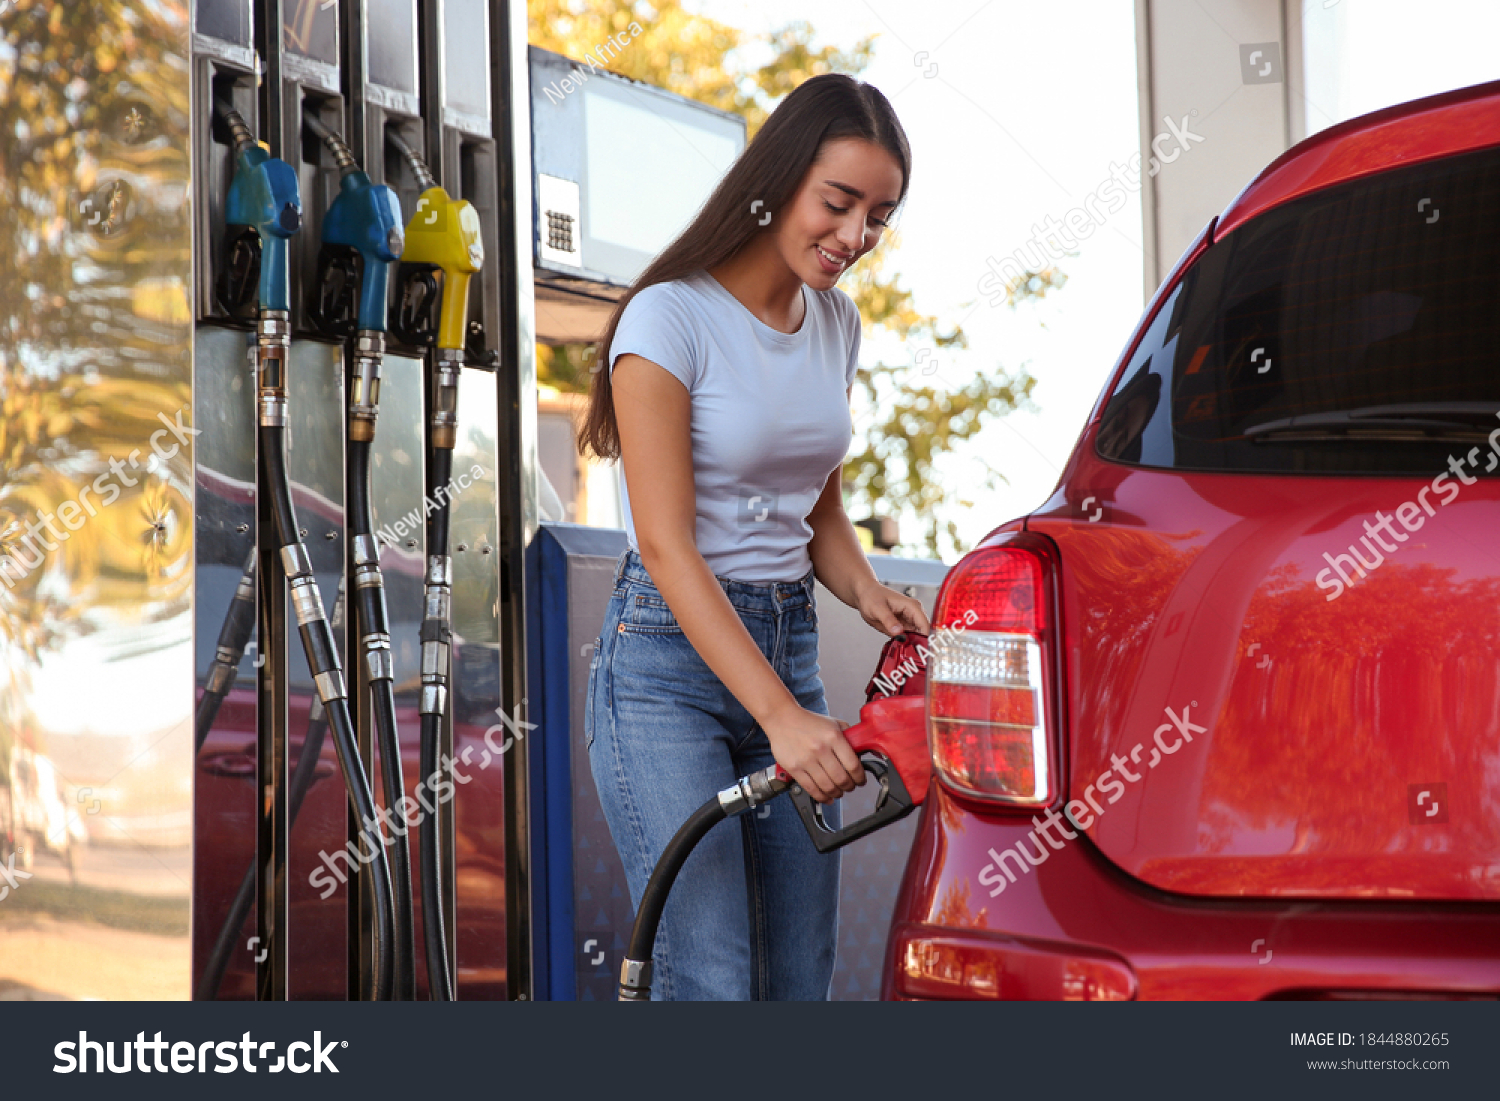 Young woman refueling car at self service gas station #1844880265